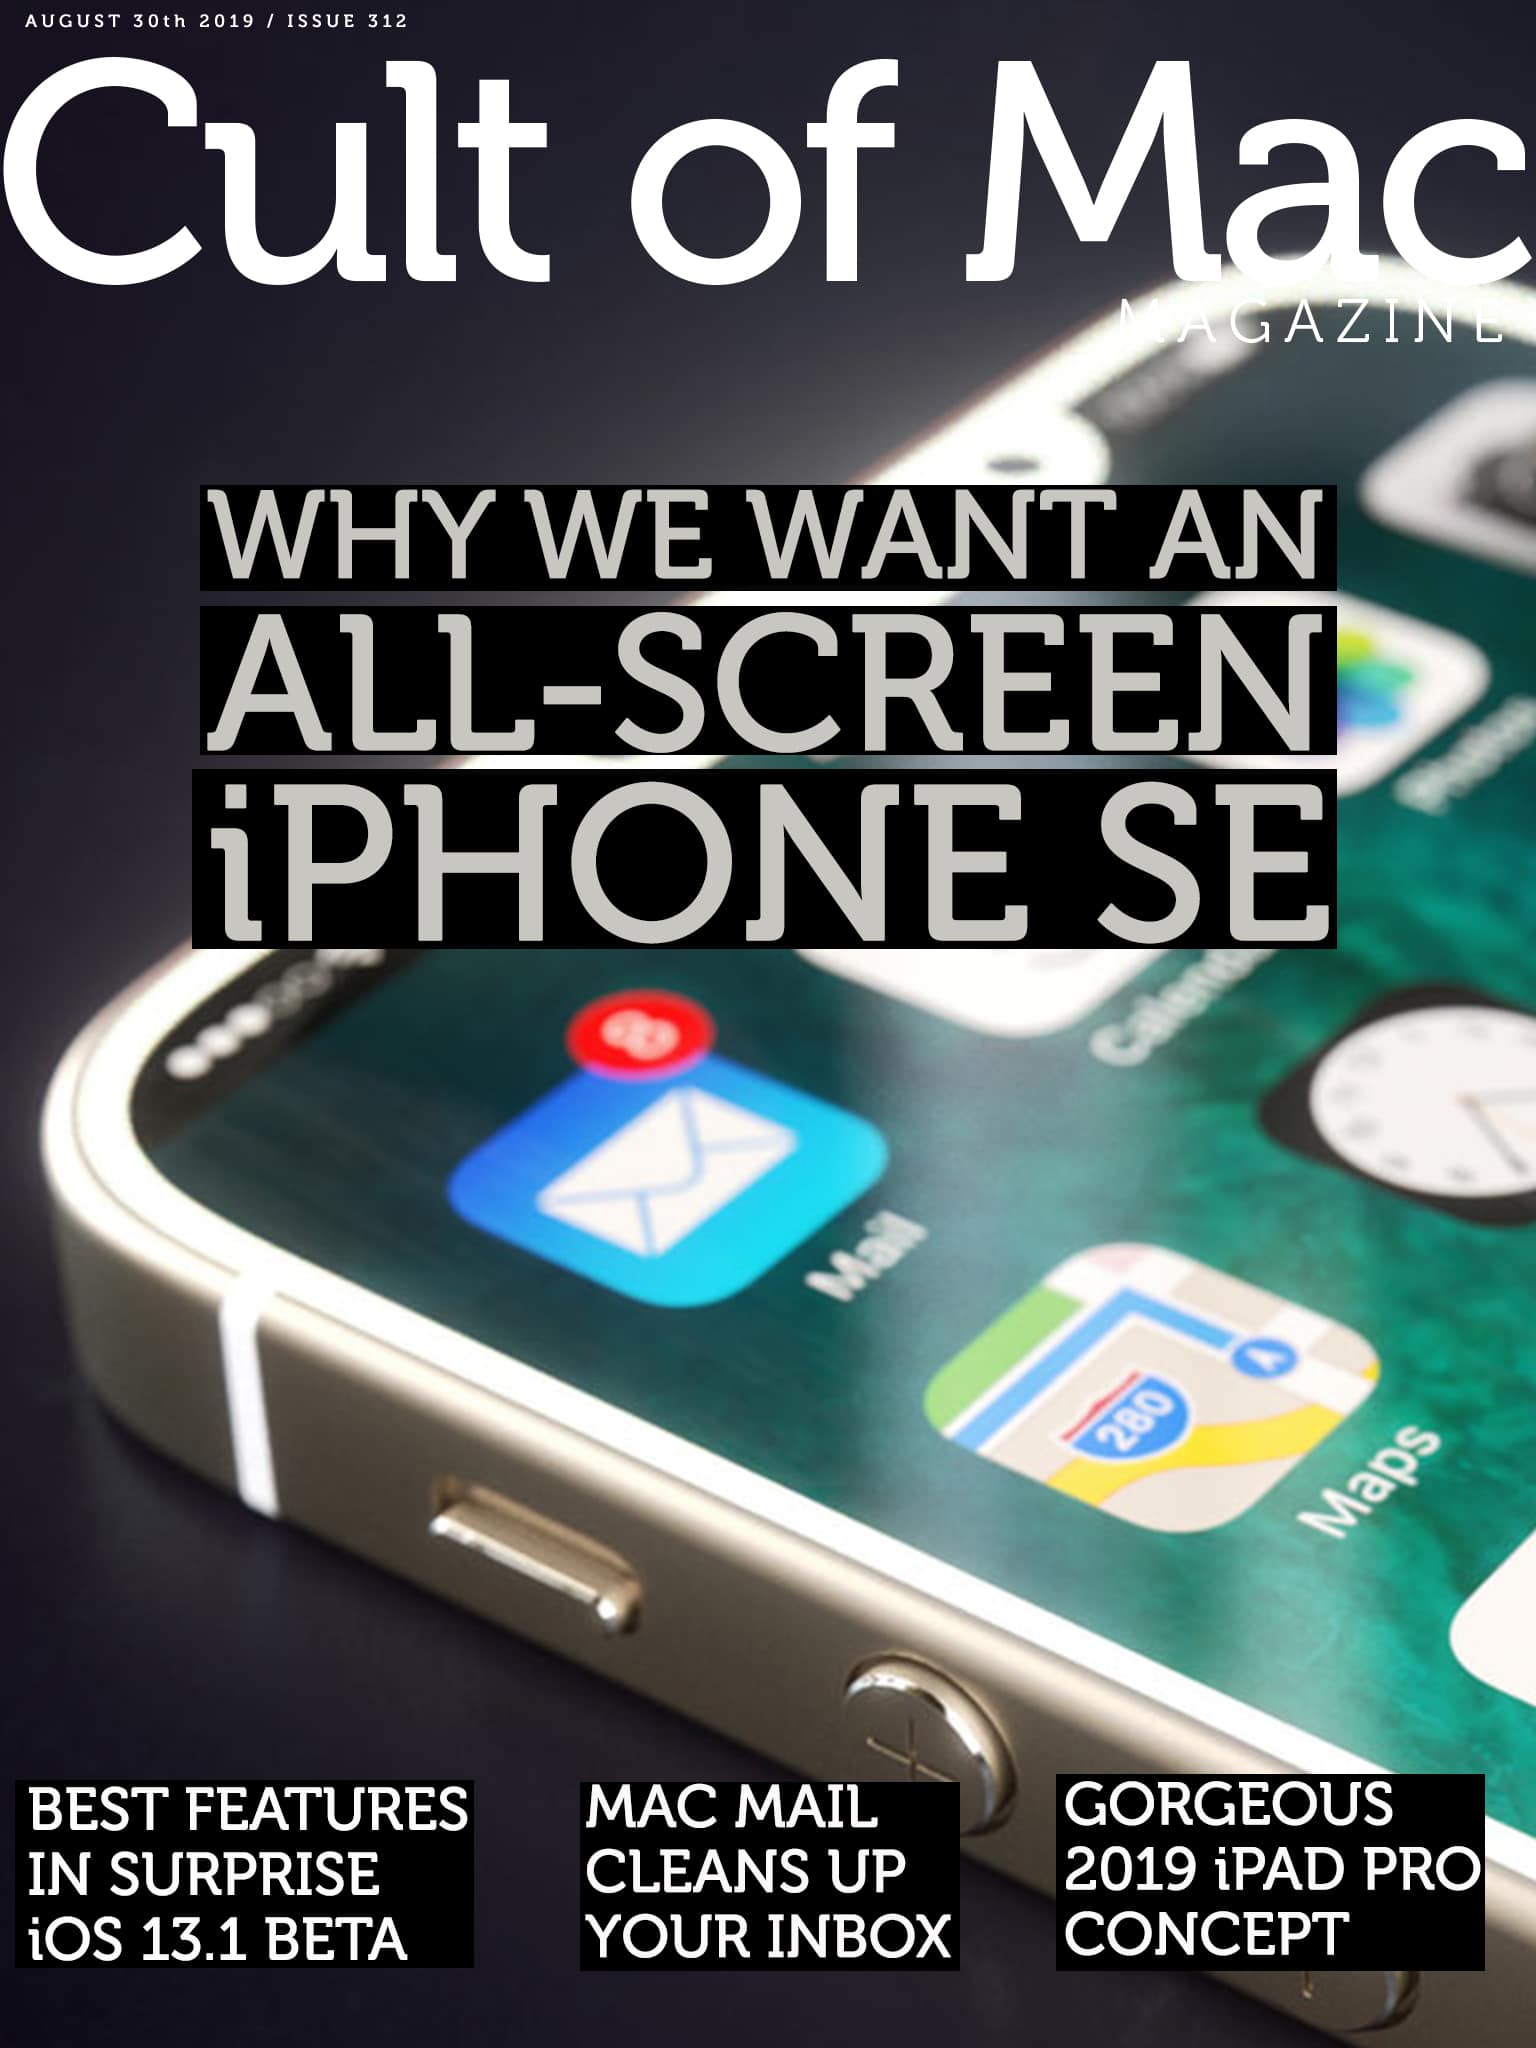 The case for an iPhone SE with an iPhone XS screen, in this week's issue of Cult of Mac Magazine 312.